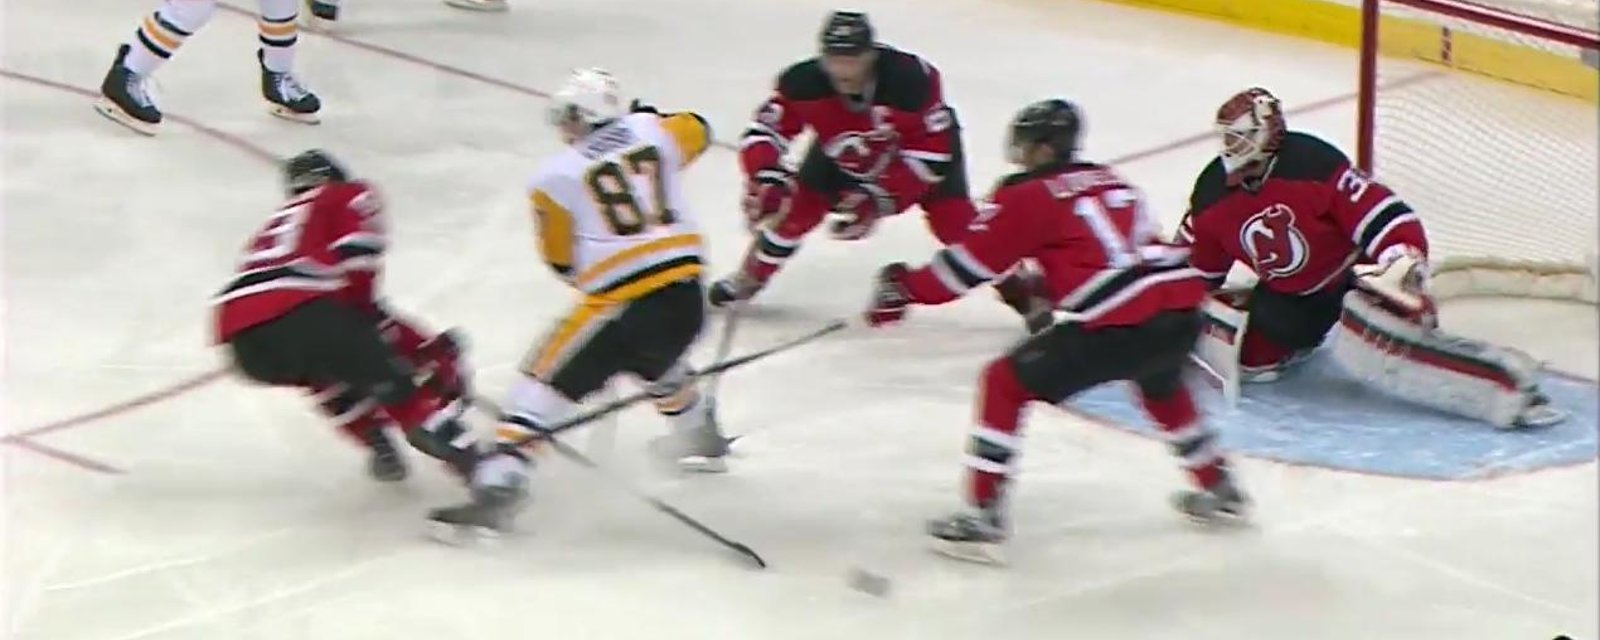 MUST SEE : Amazingly smart no-look between the legs by Crosby. 